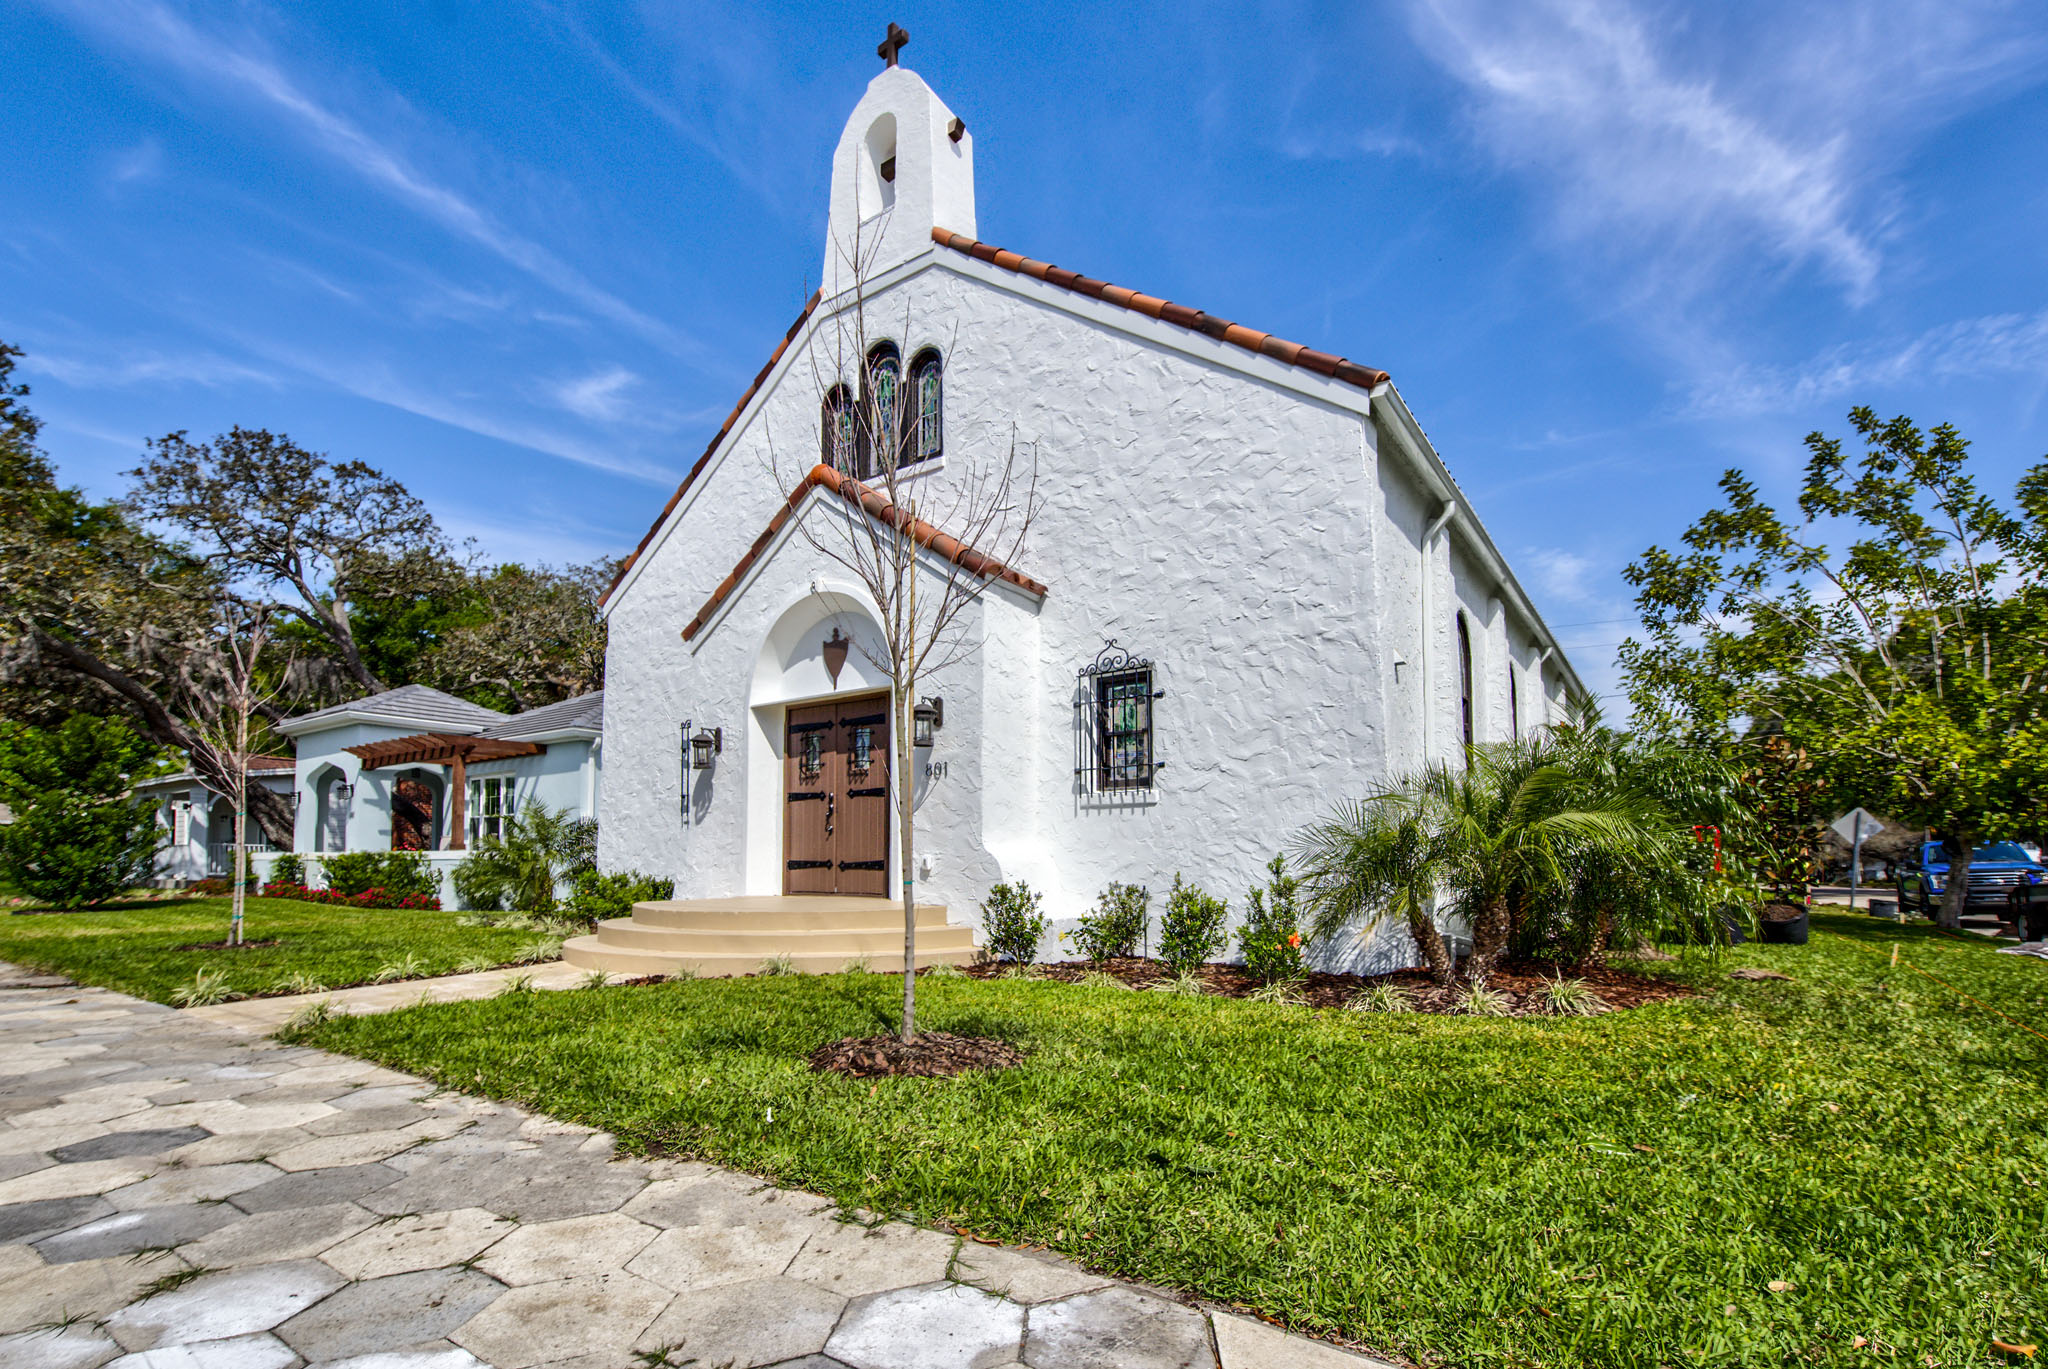 St. Petersburg Historic Church-Turned-Home Set To Sell For $1.3 Million